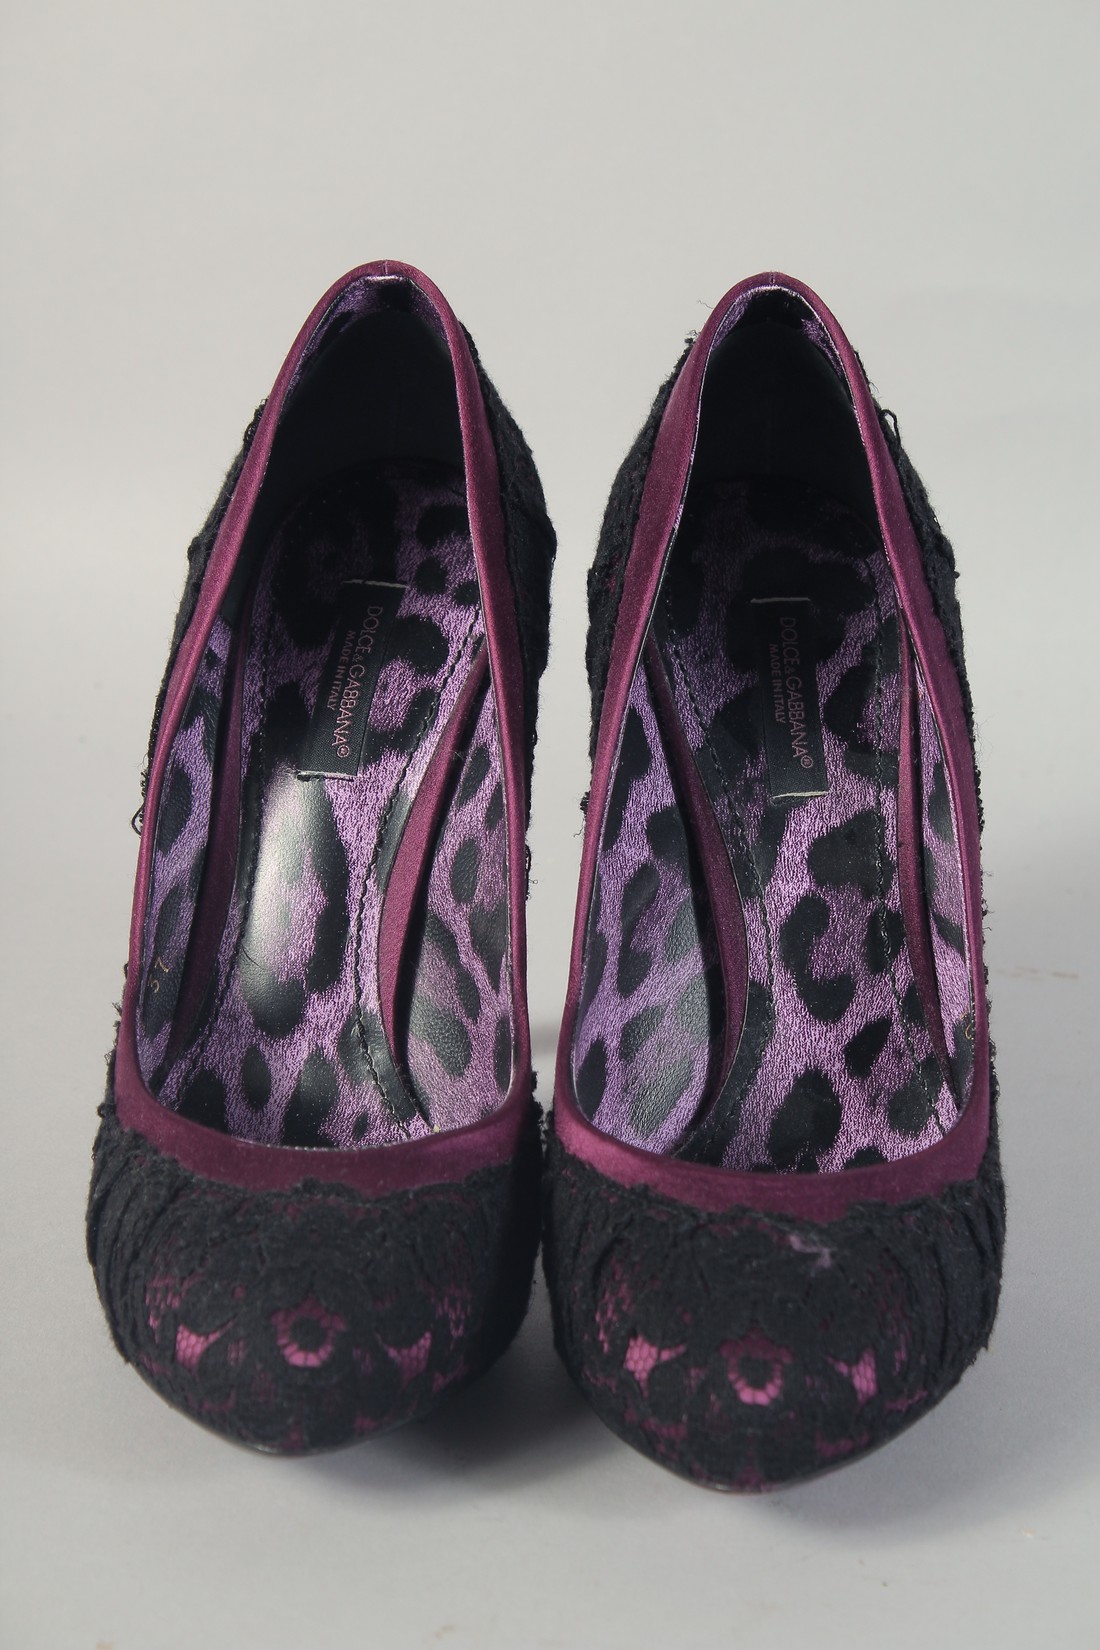 A PAIR OF DOLCE AND GABBANA BLACK AND PURPLE HIGH HEEL SHOES. Size 37. - Bild 2 aus 7